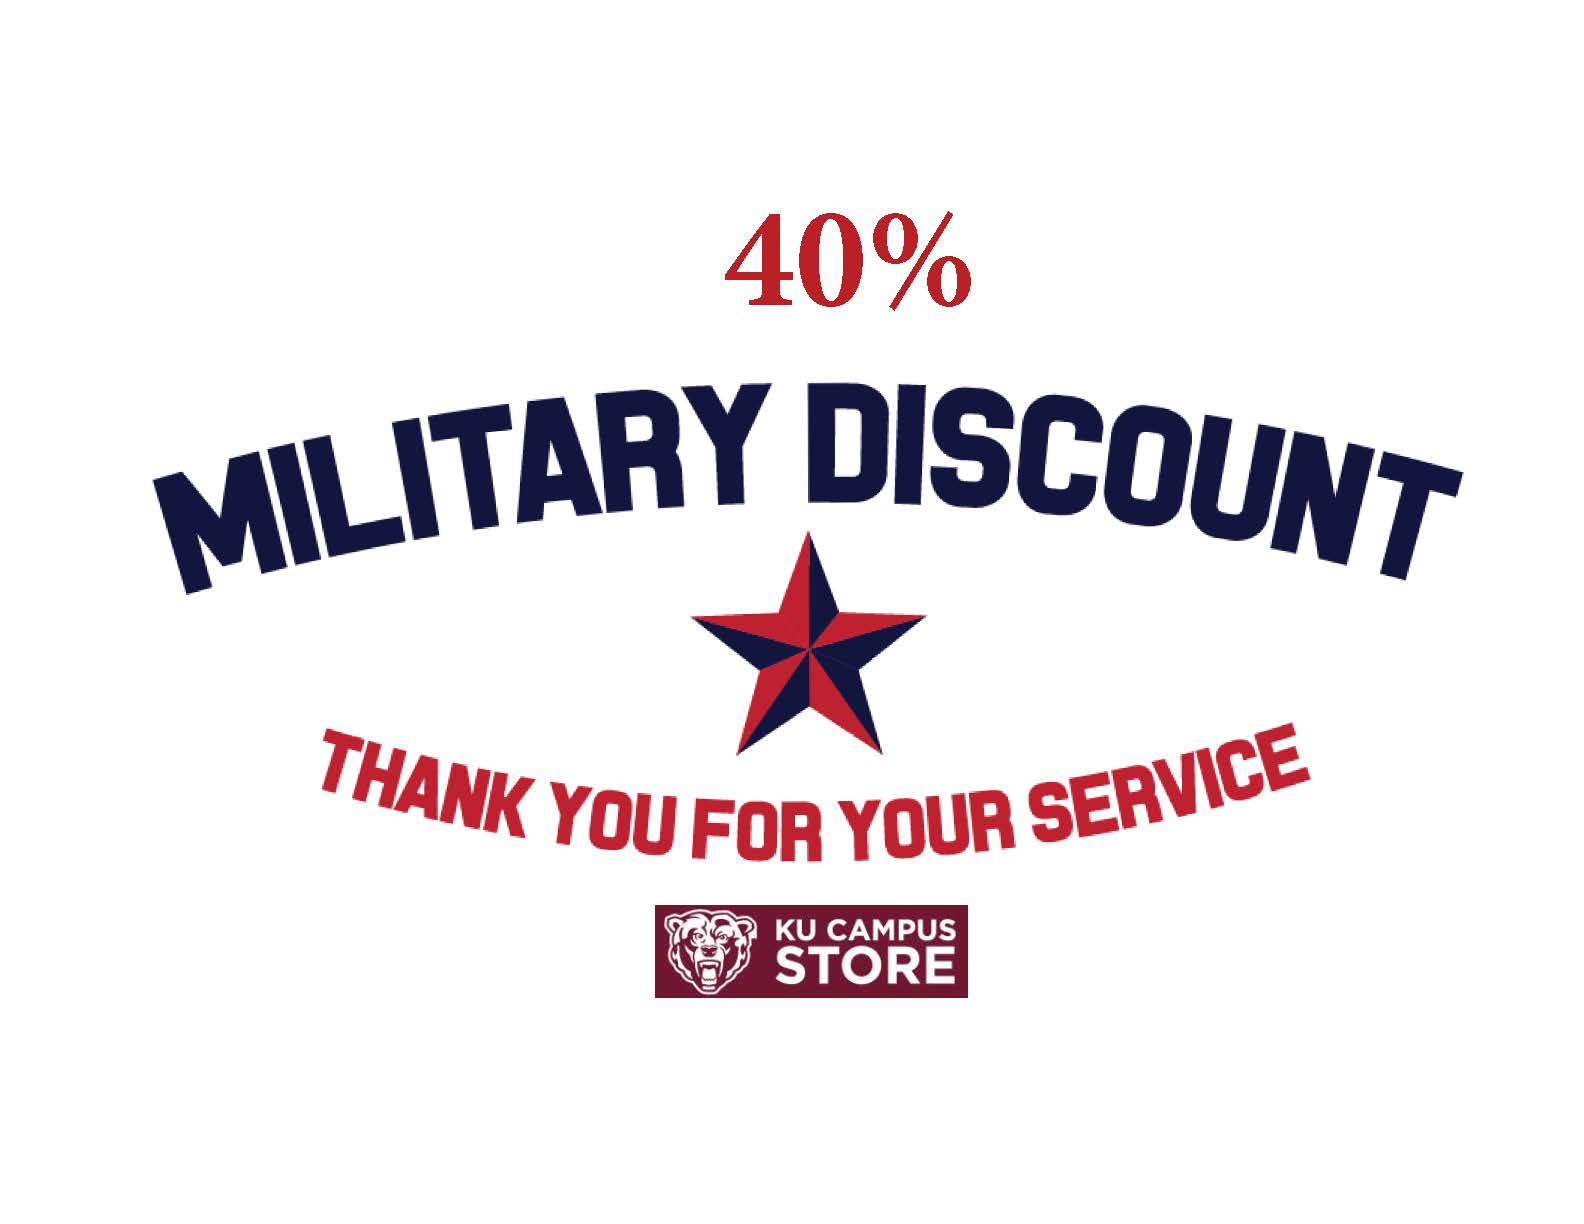 40% Military Discount with a red star graphic thank you for your service the KU campus store logo